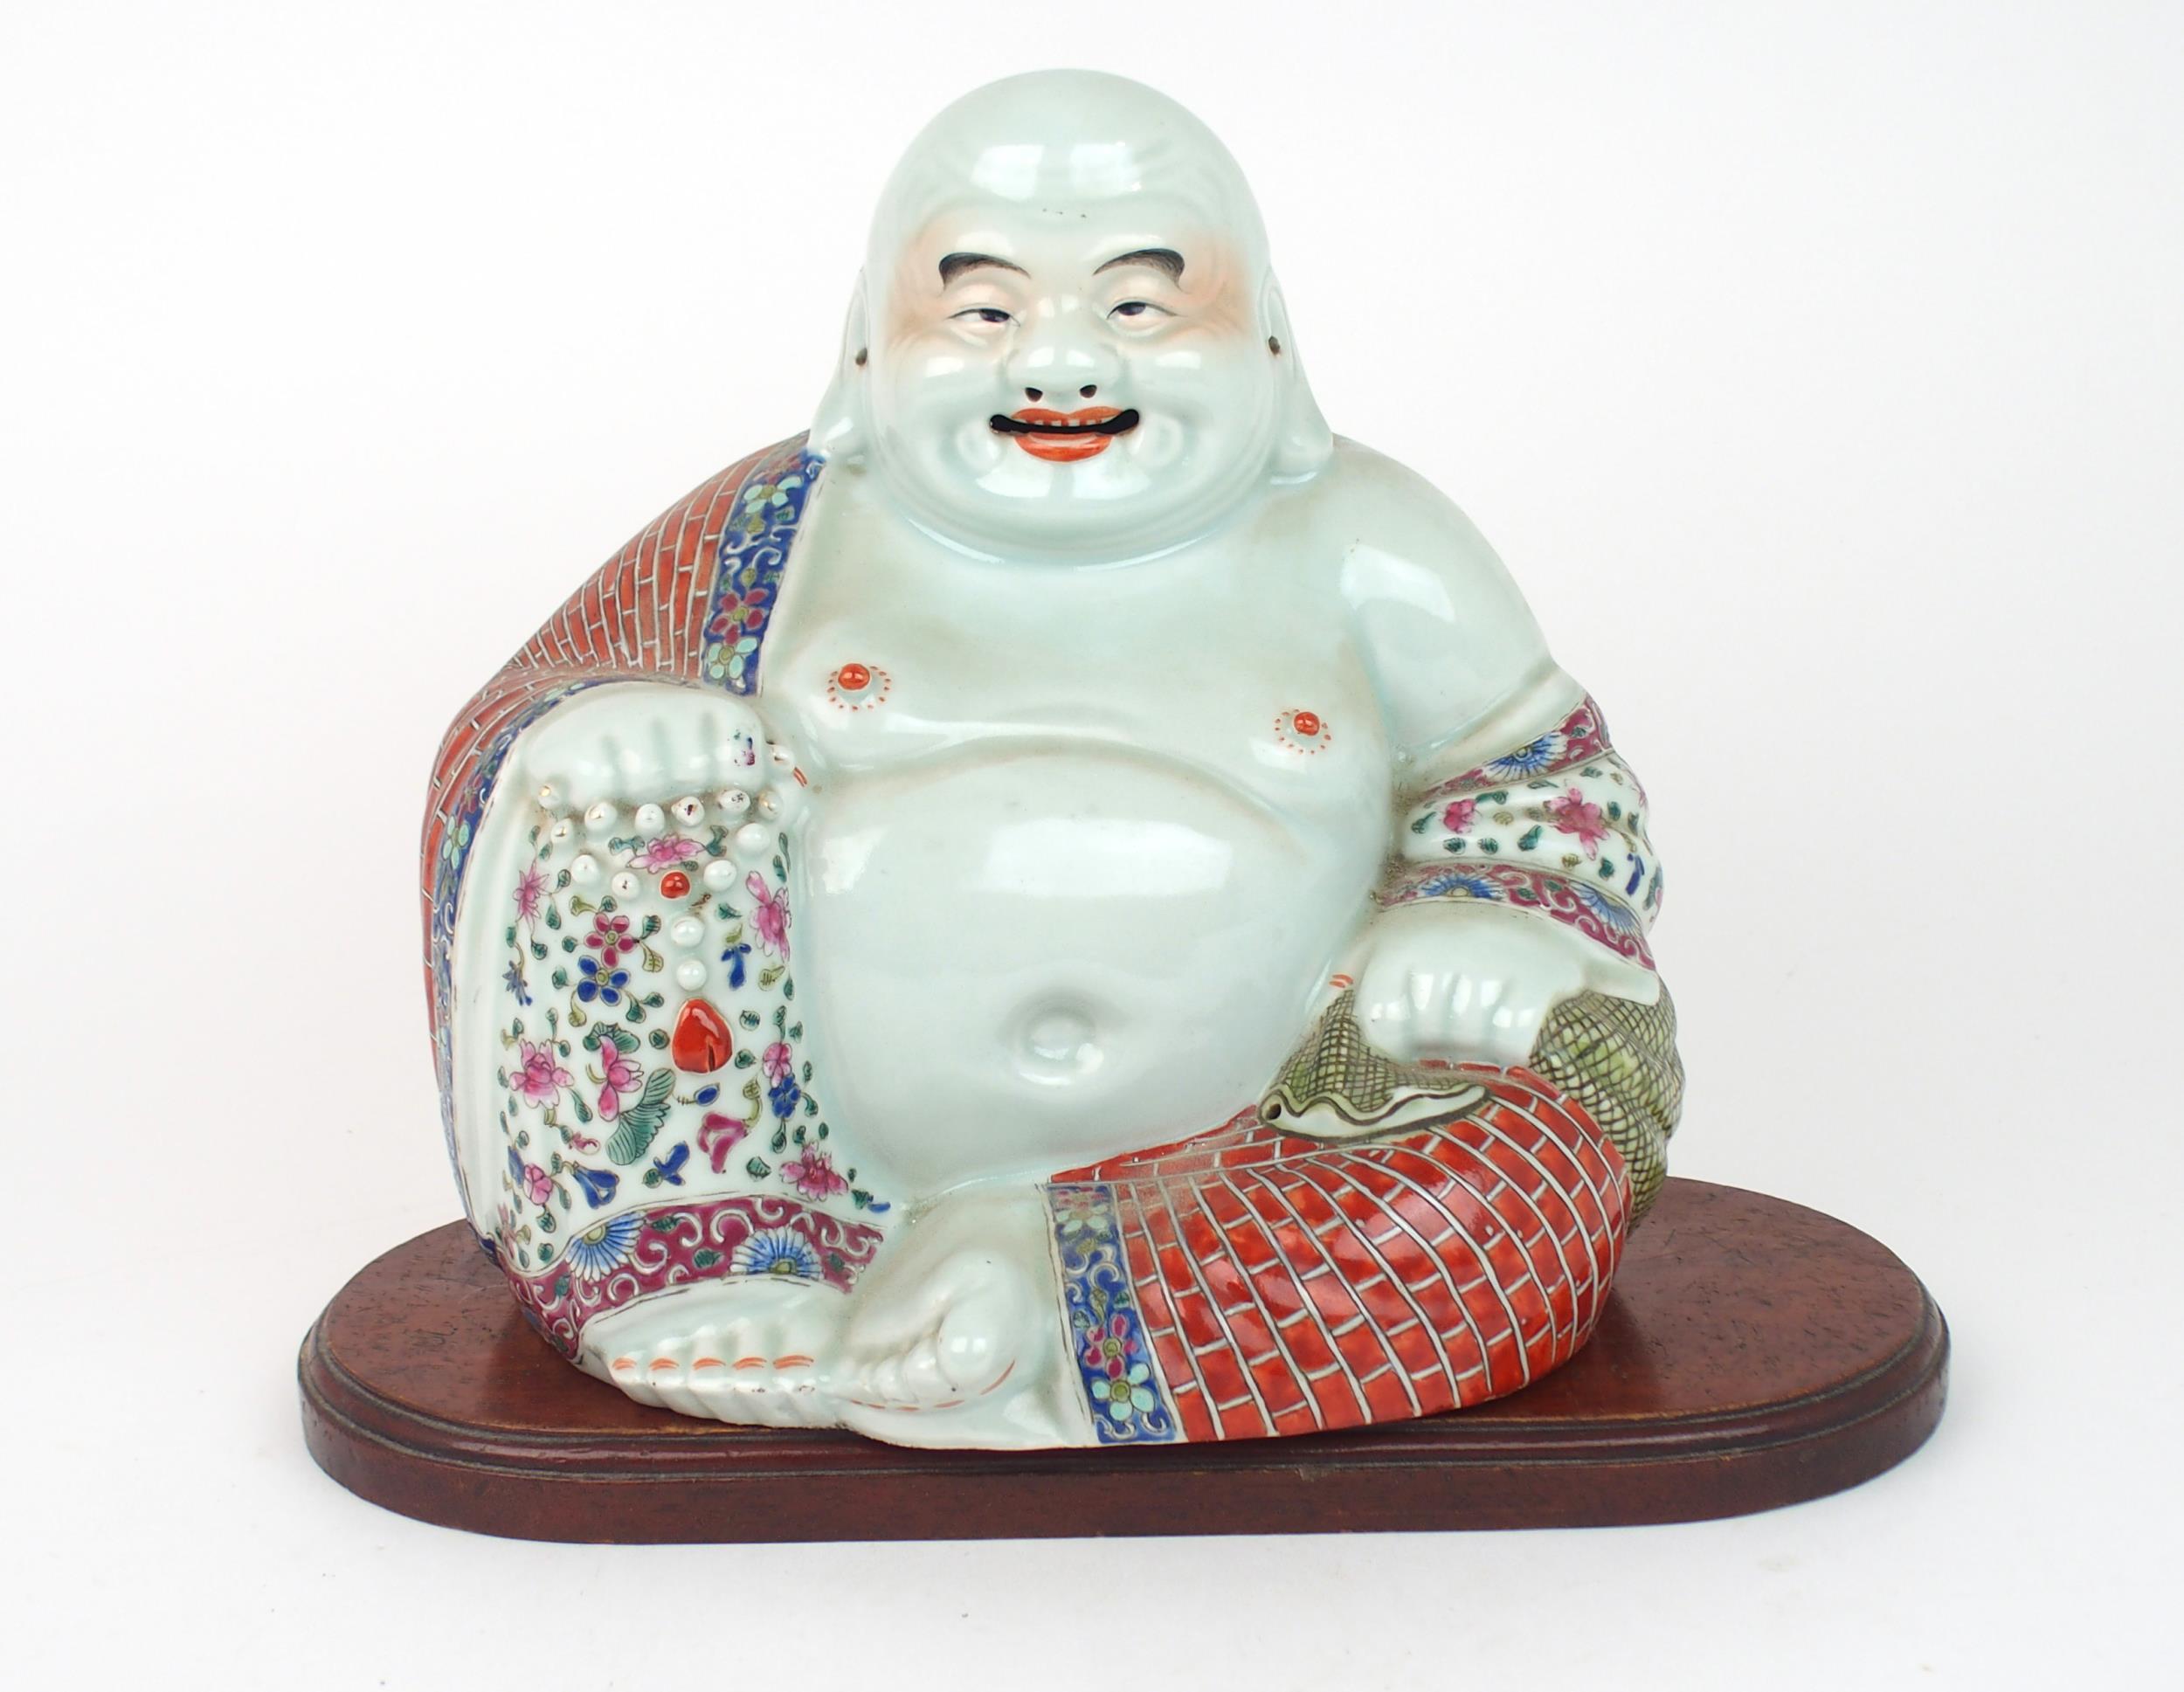 A CHINESE MODEL OF BUDDHA  seated with rosary beads and patterned costume, on a wooden stand,